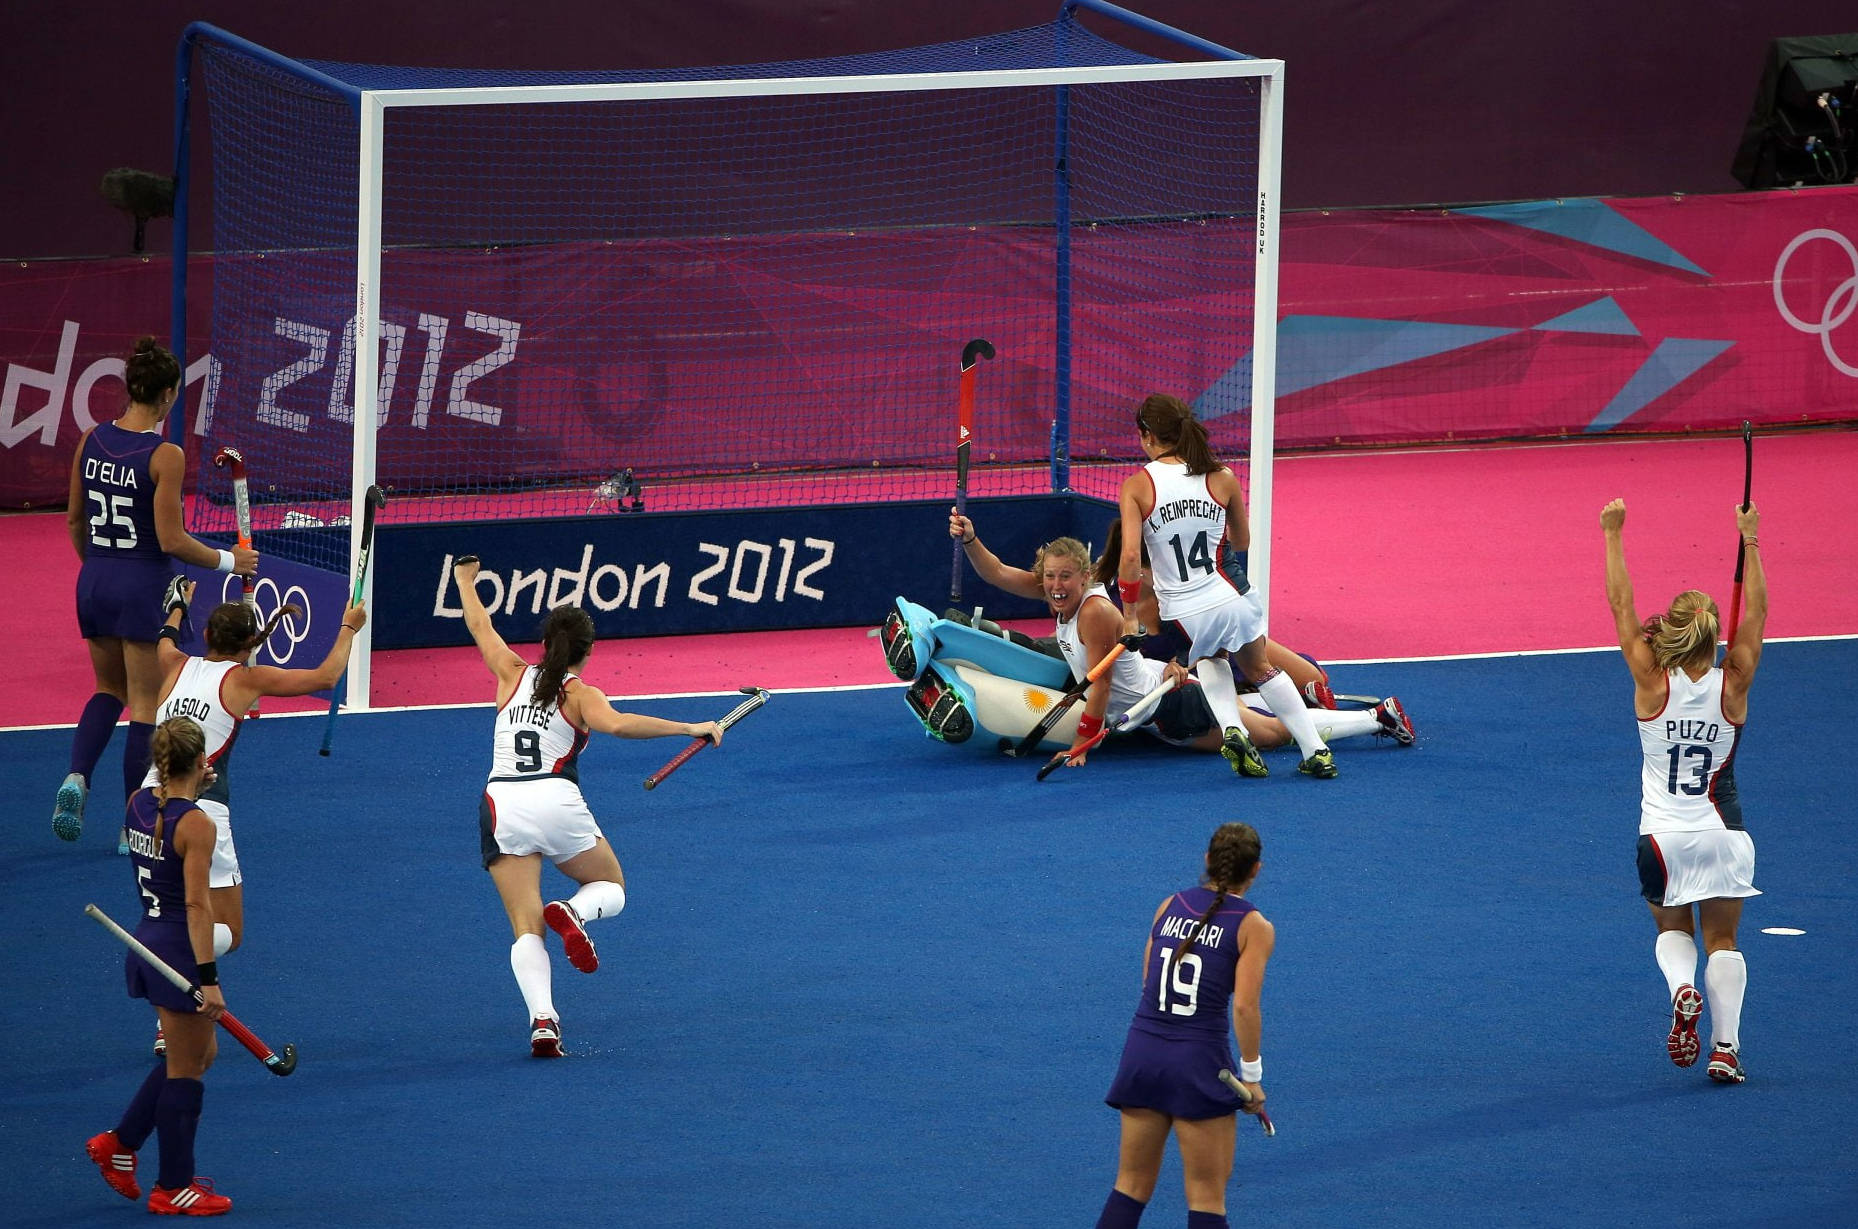 Explosive Field Hockey Match At The 2012 Olympic Games Background